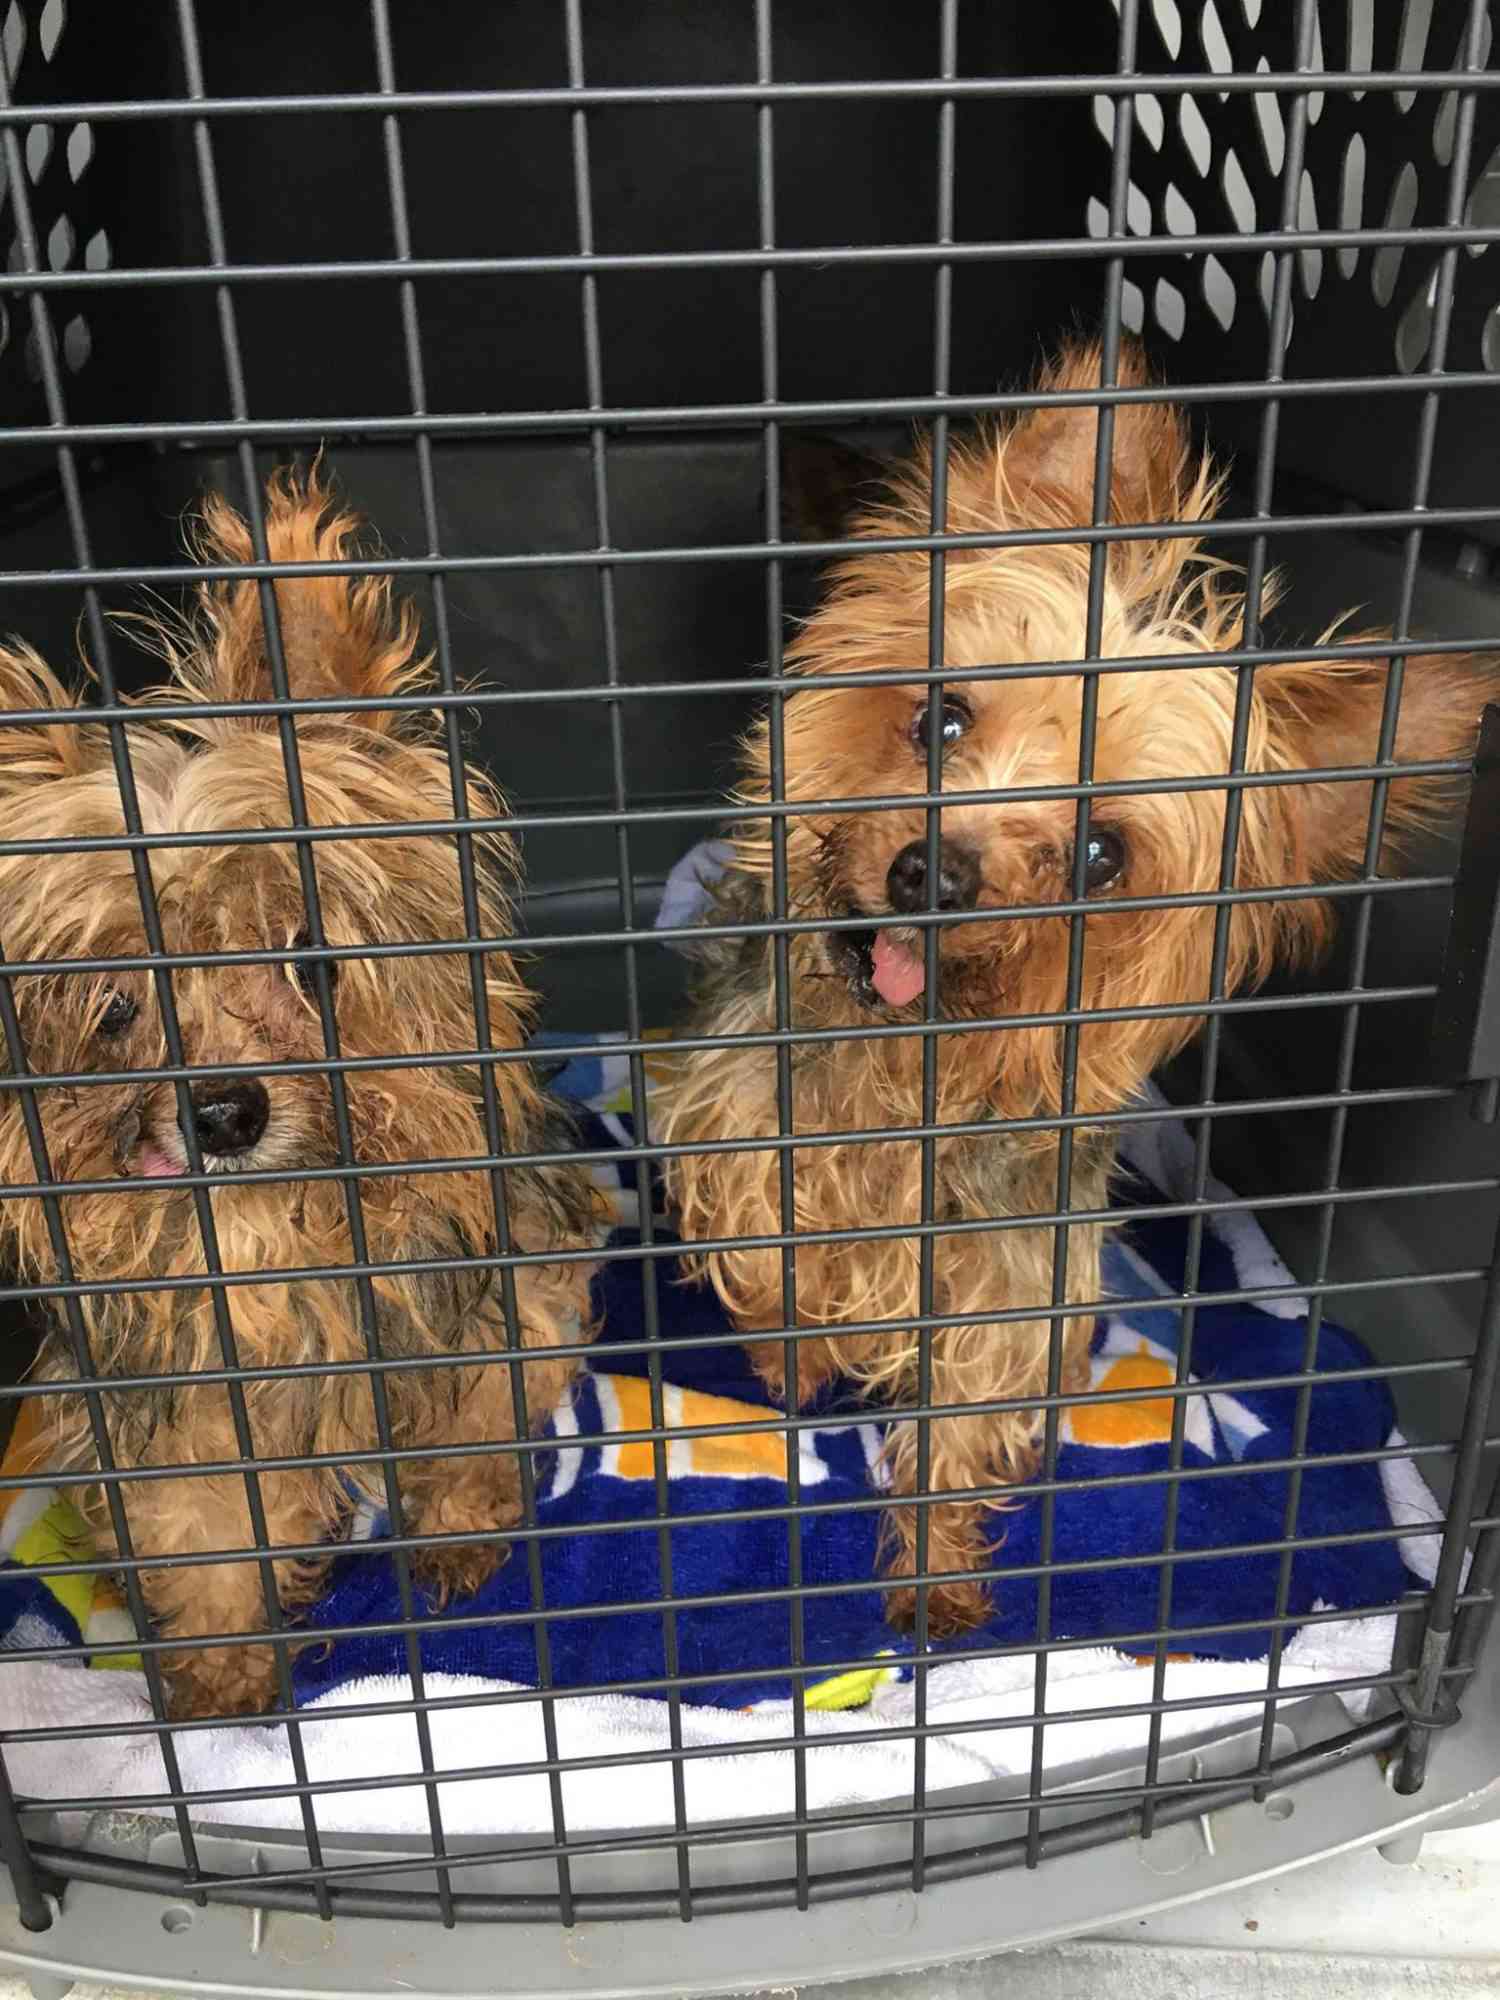  52 Dogs, Including Paralyzed Pups, Rescued from Hoarding Situation in Rural Illinois 